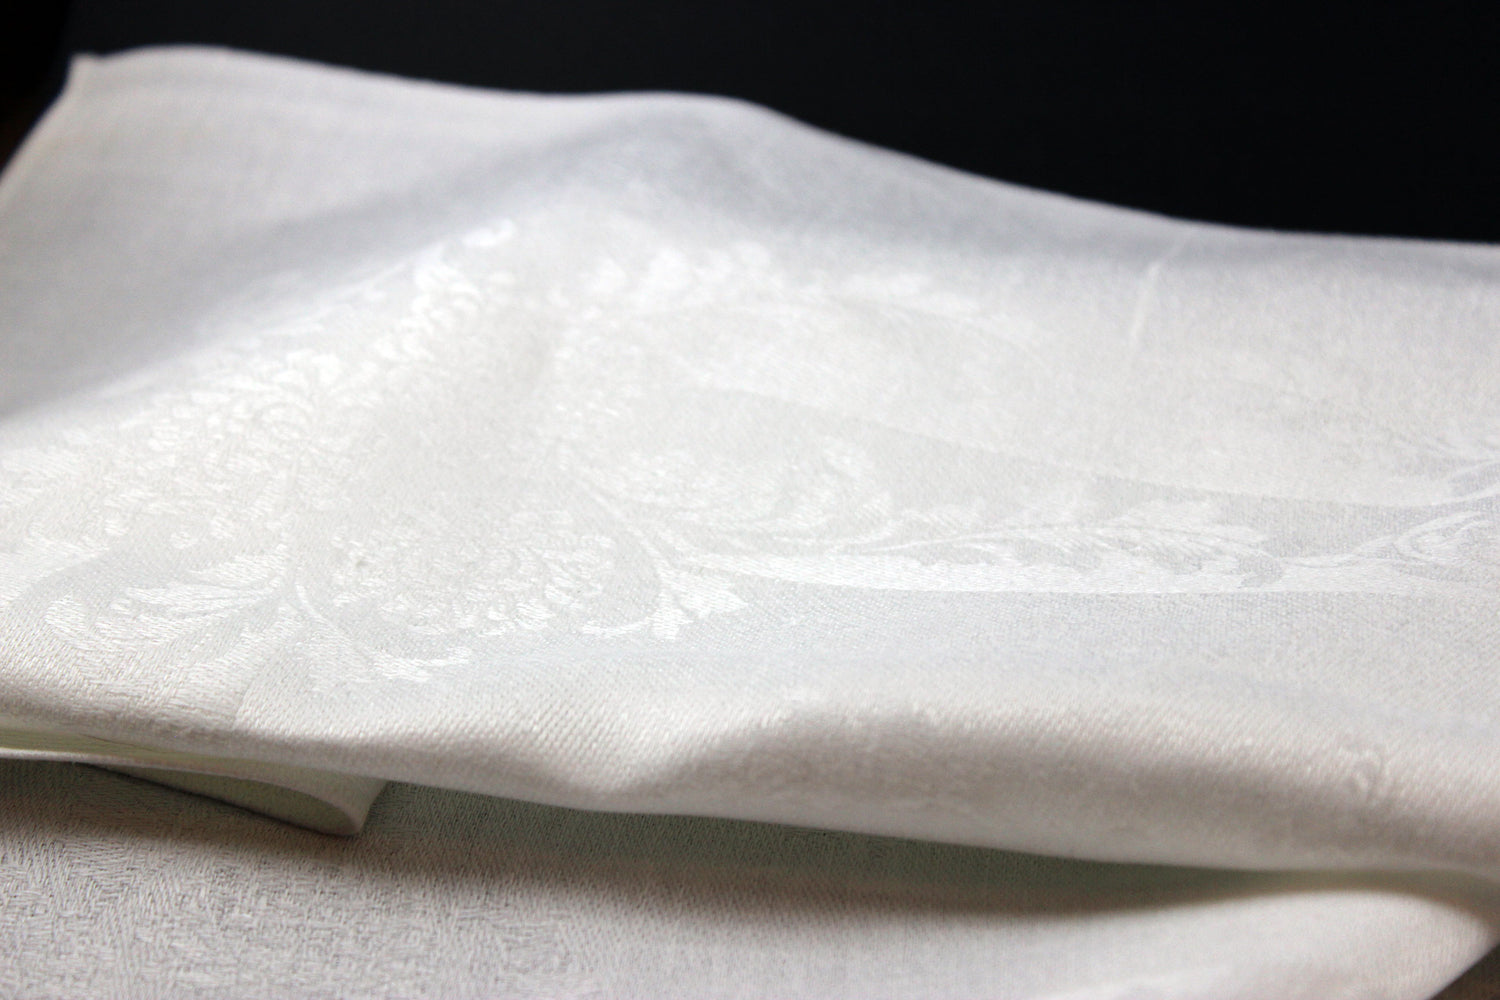 Irish Linen Napkins with Frames and Chrysanthemums